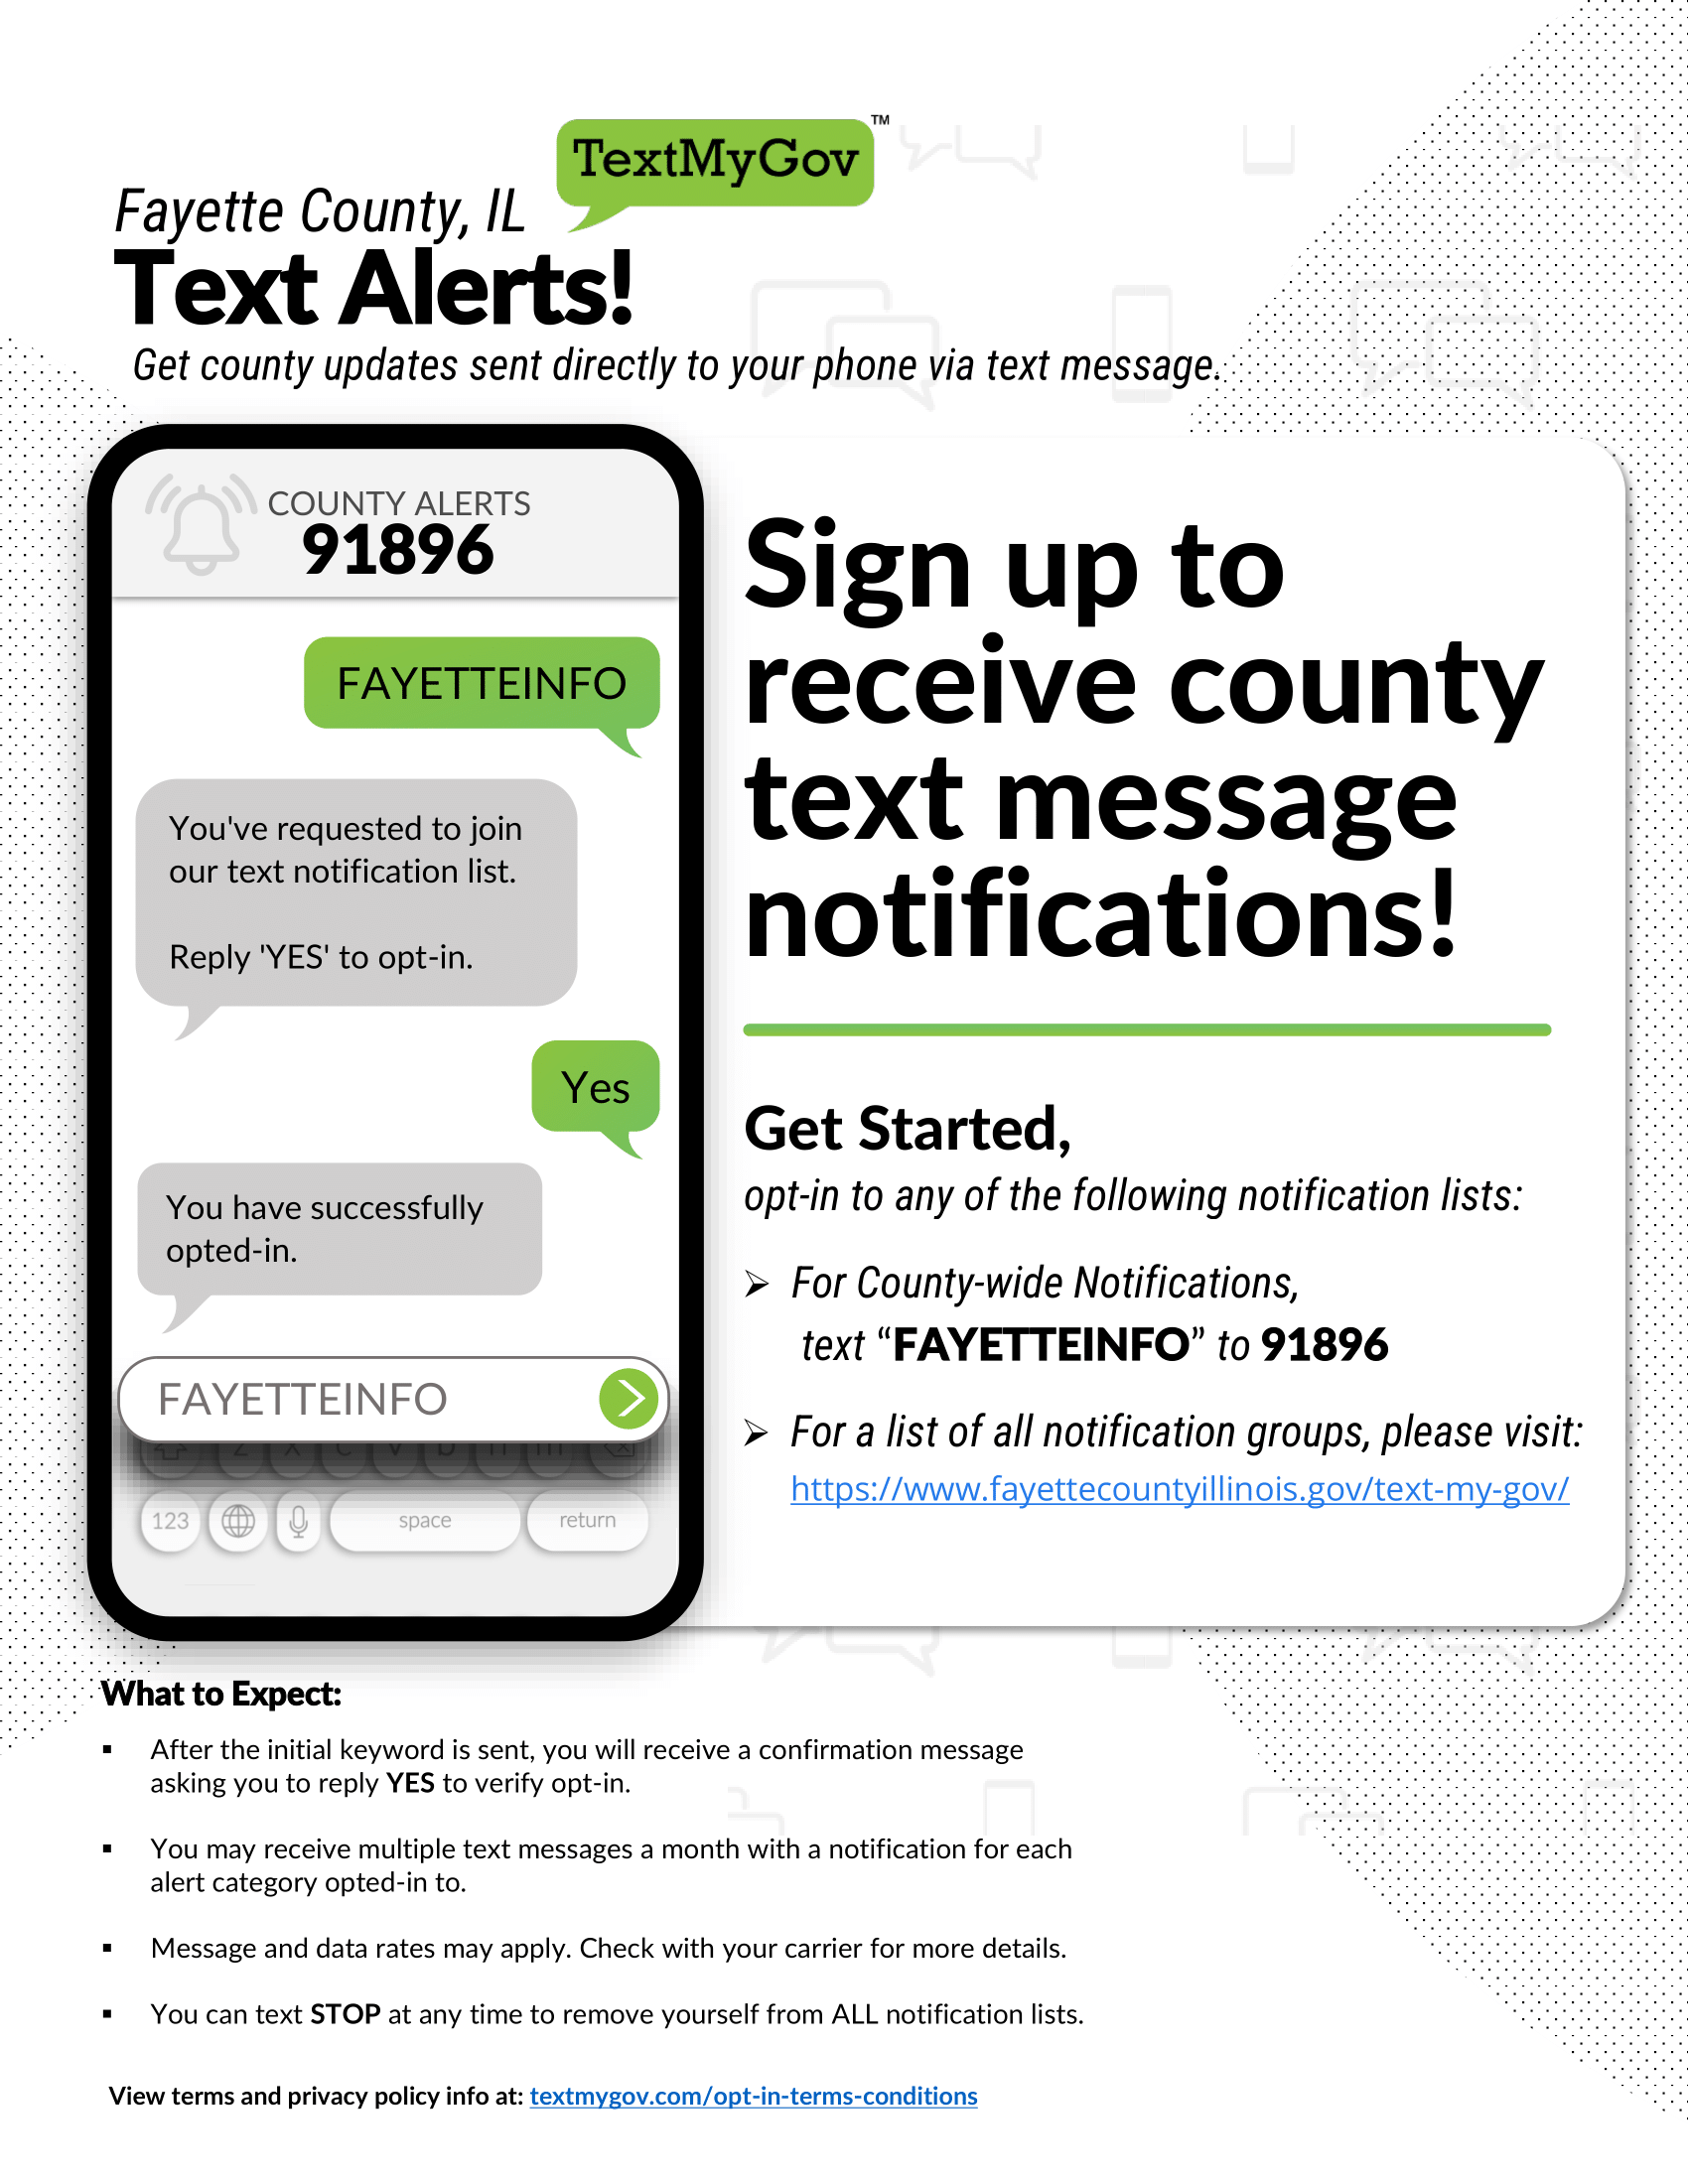 Fayette County Text Alerts